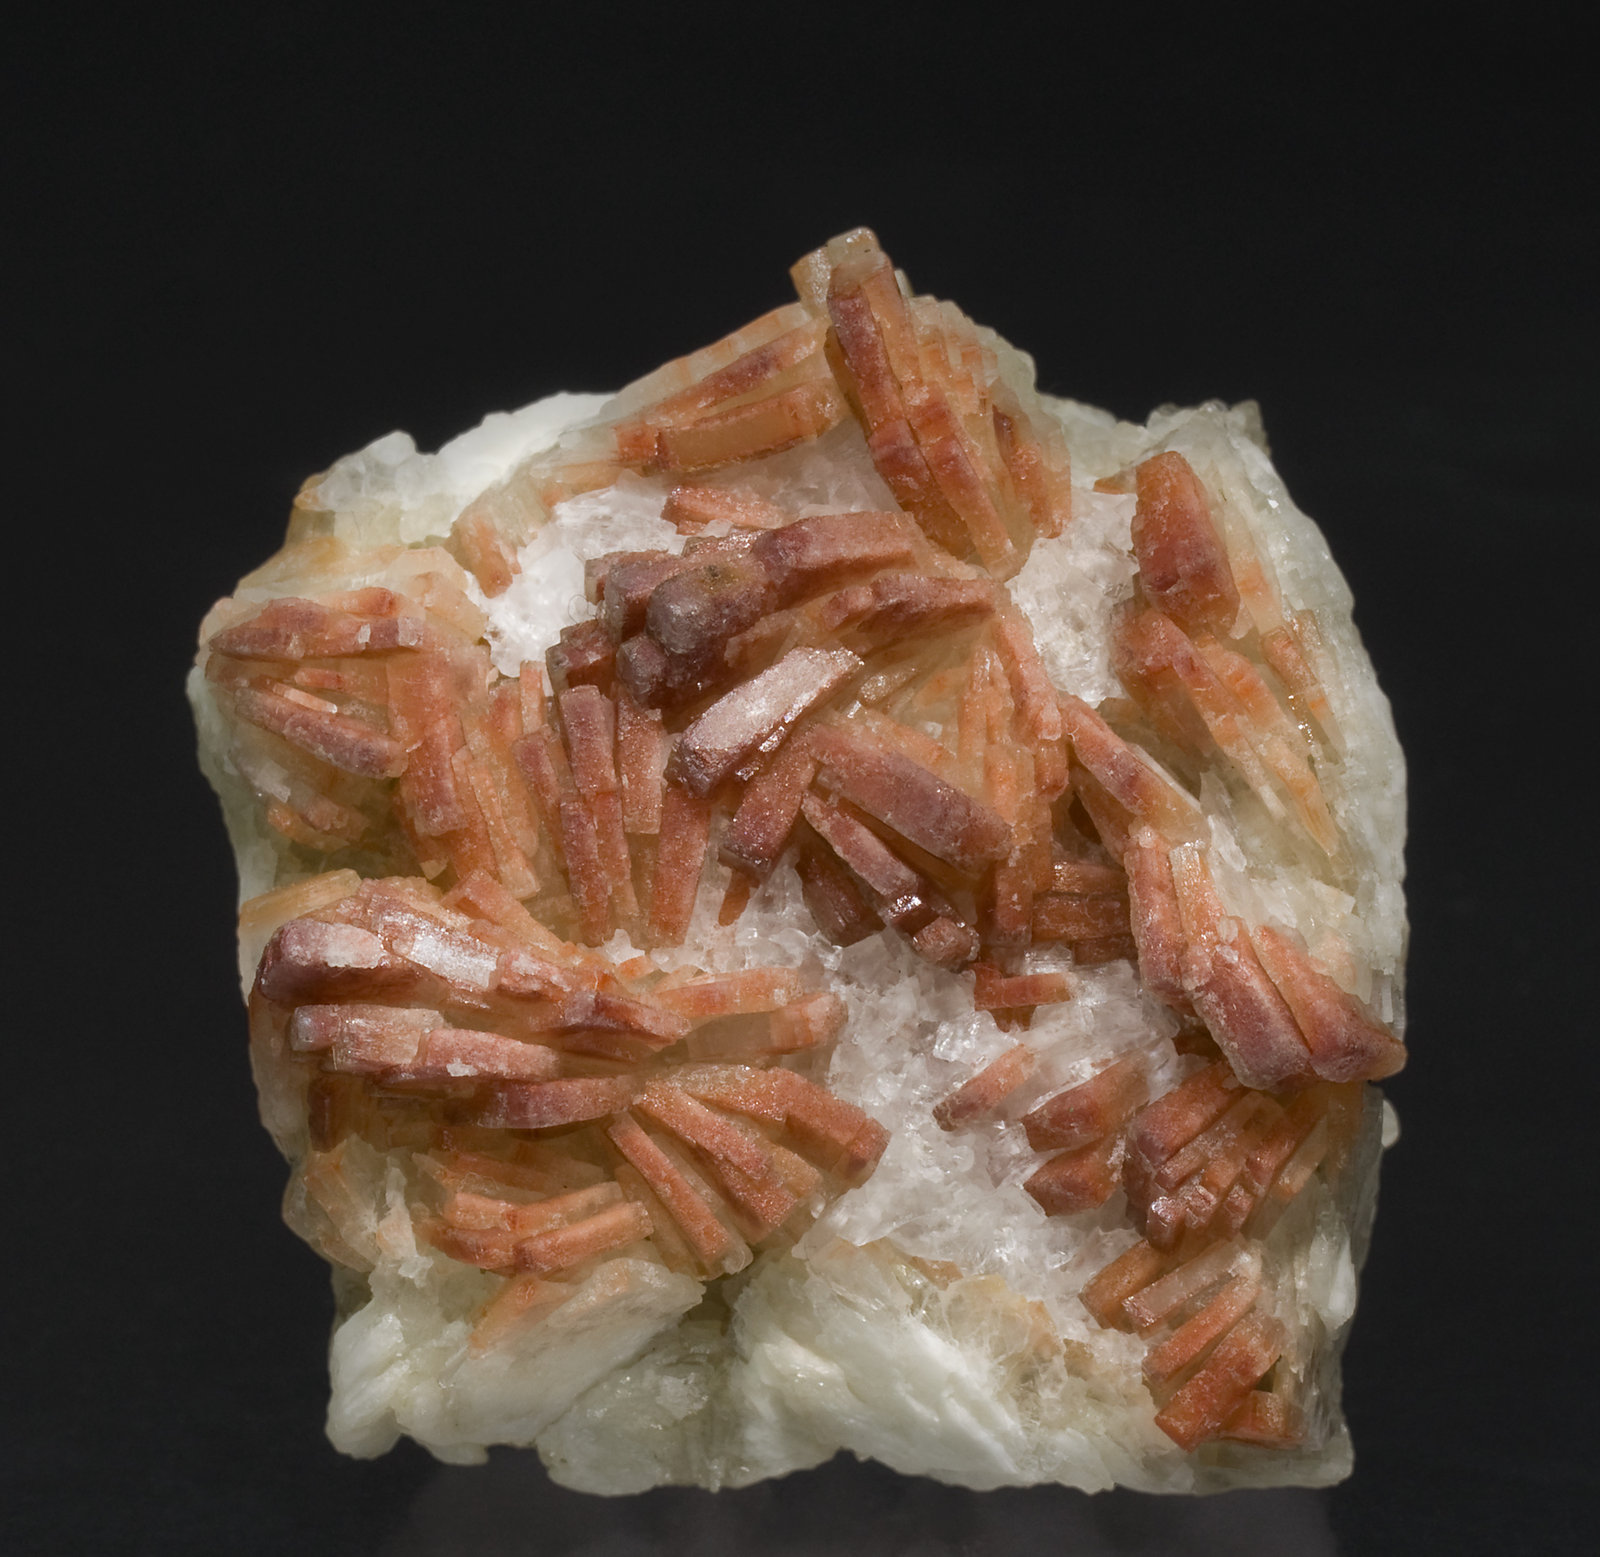 specimens/s_imagesW4/Barite-NG11W4f.jpg